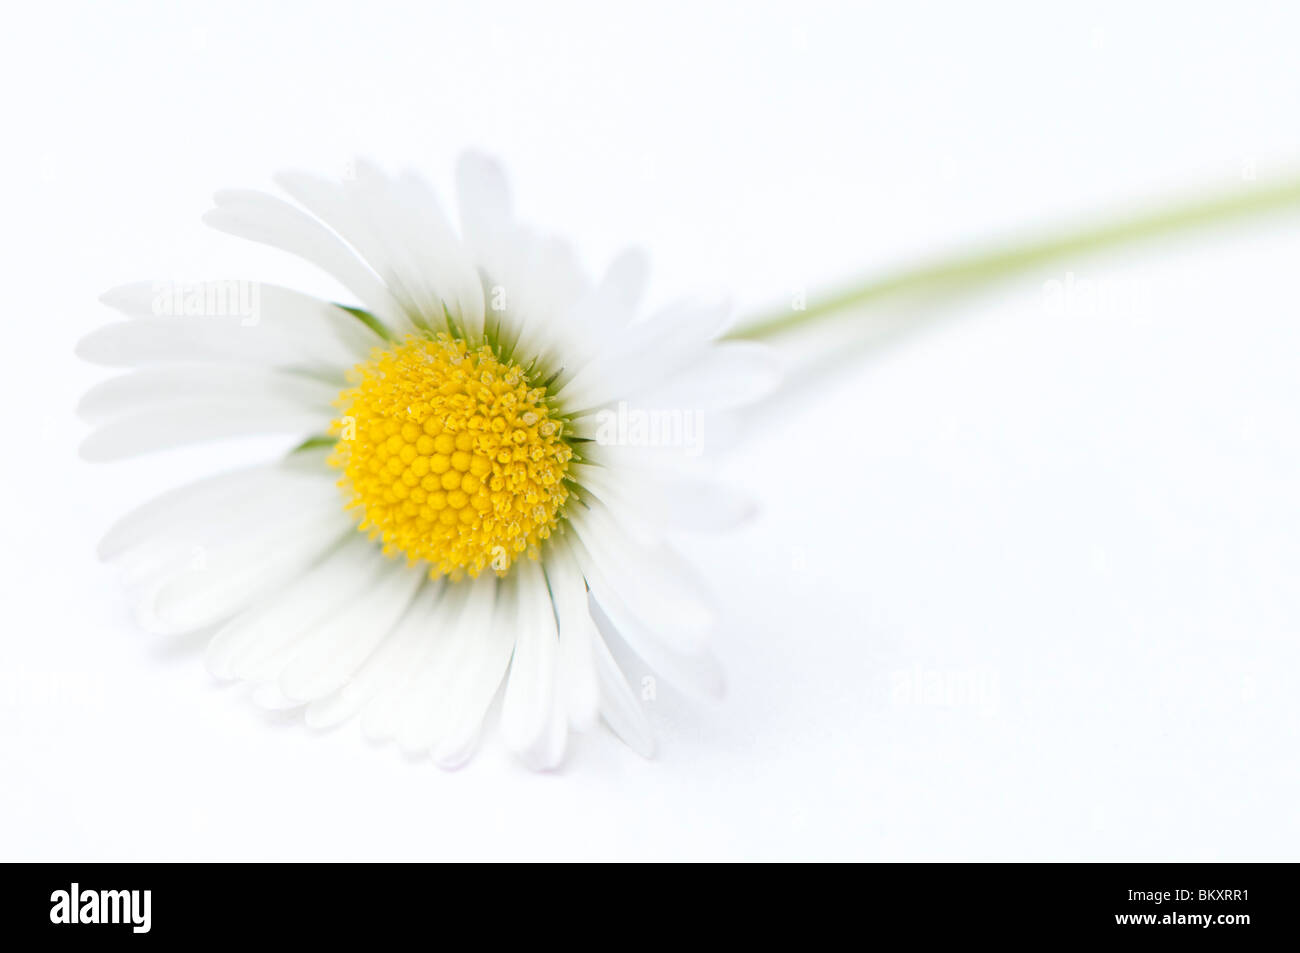 Close up of a daisy, Bellis perennis, against a white background Stock Photo